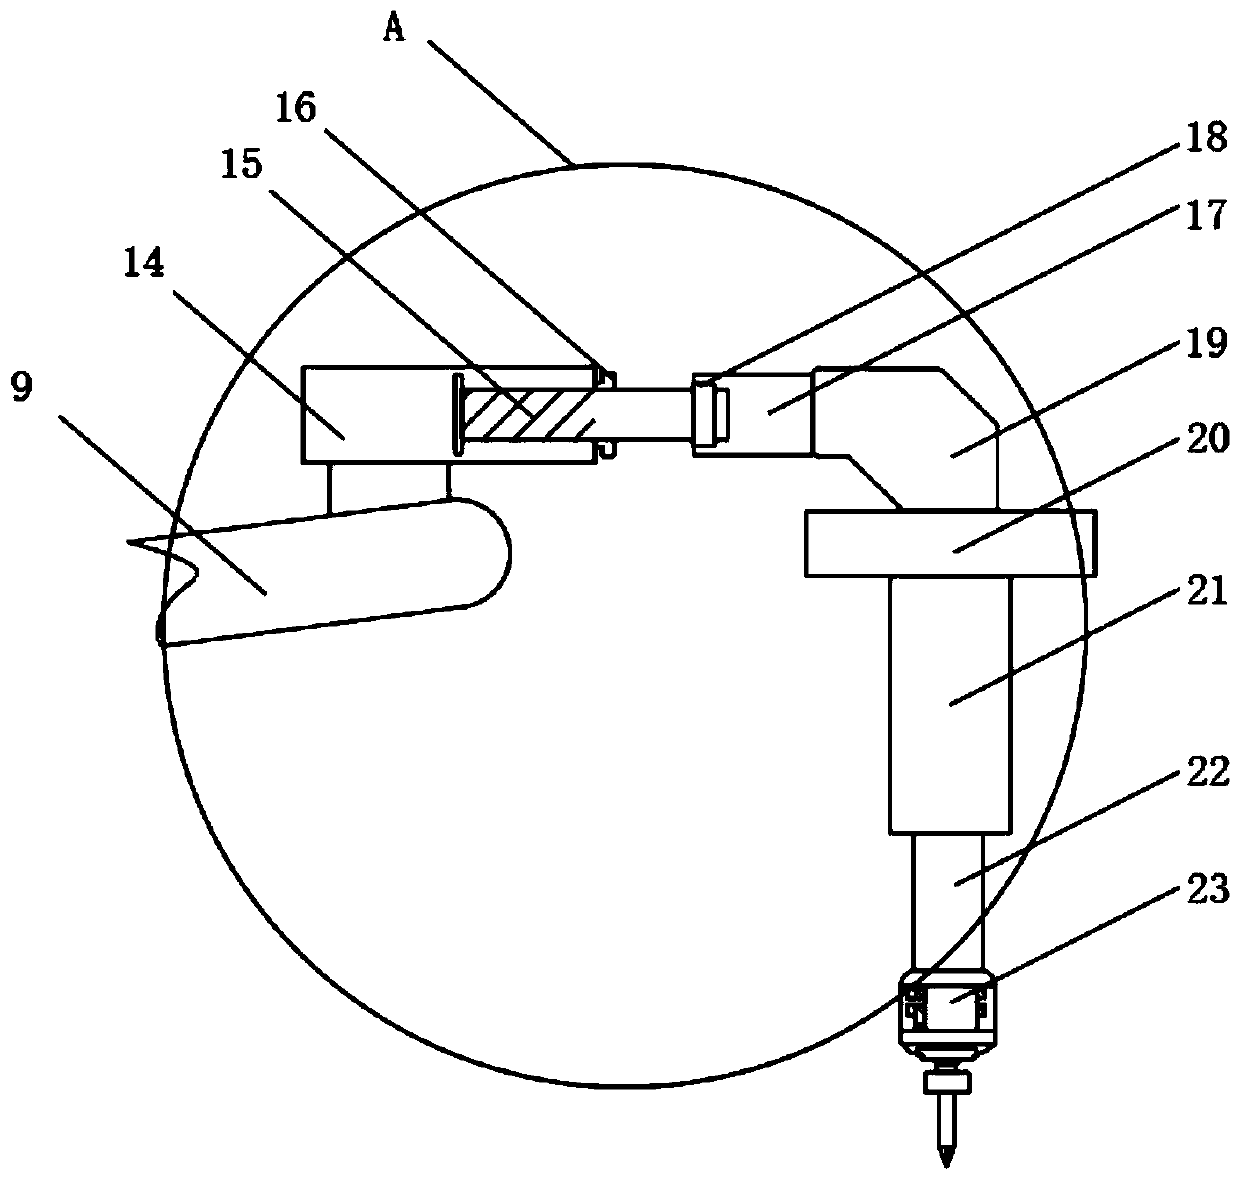 A chain automatic feeding and punching device